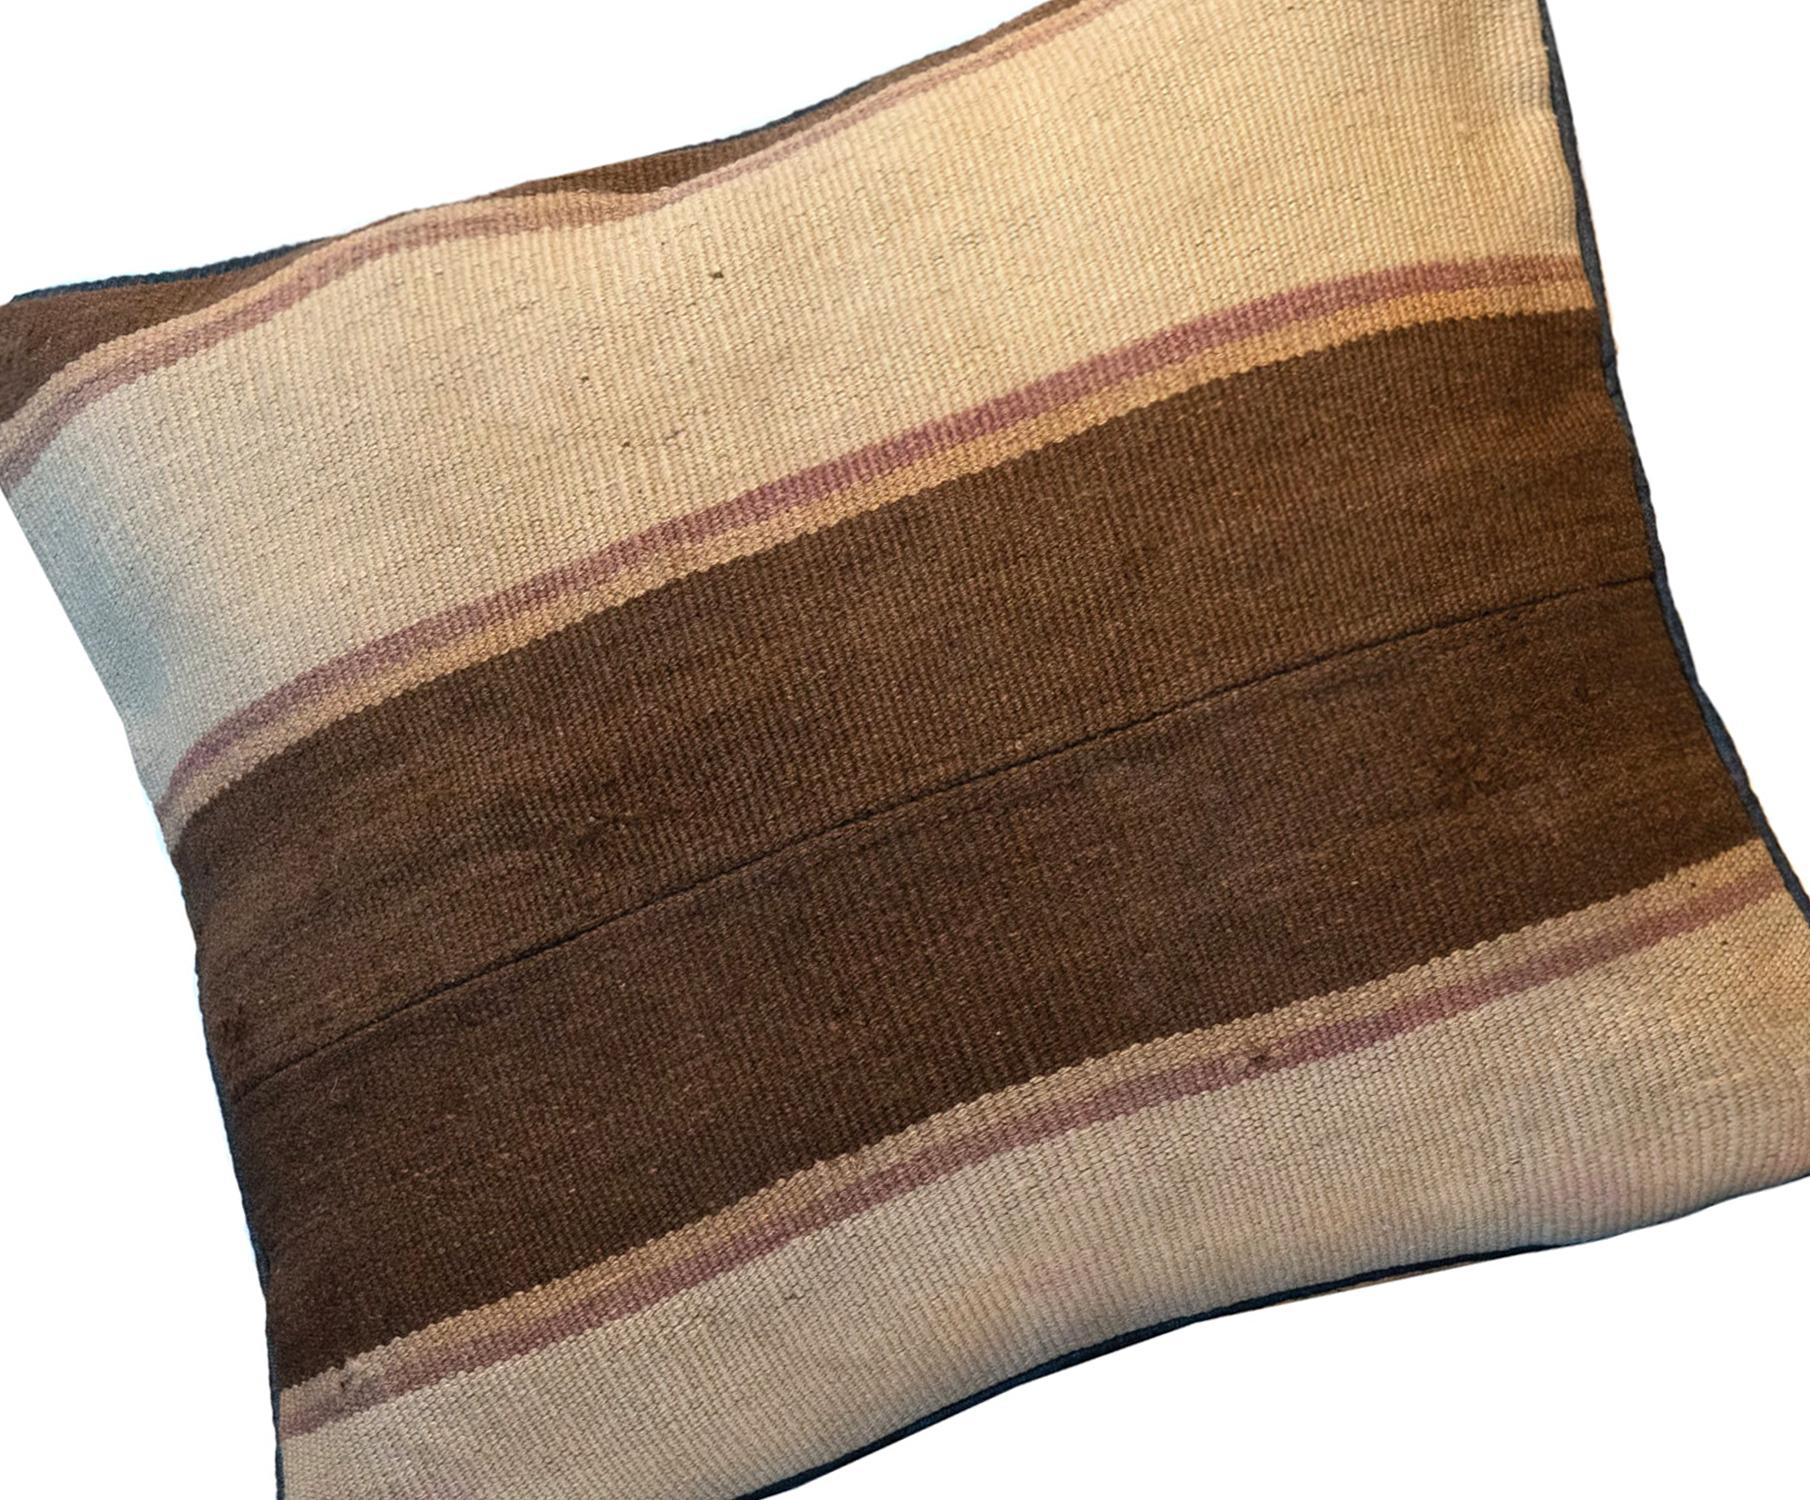 Hand-Crafted Brown Cream Striped Kilim Cushion Cover Handmade Wool Scatter Cushion